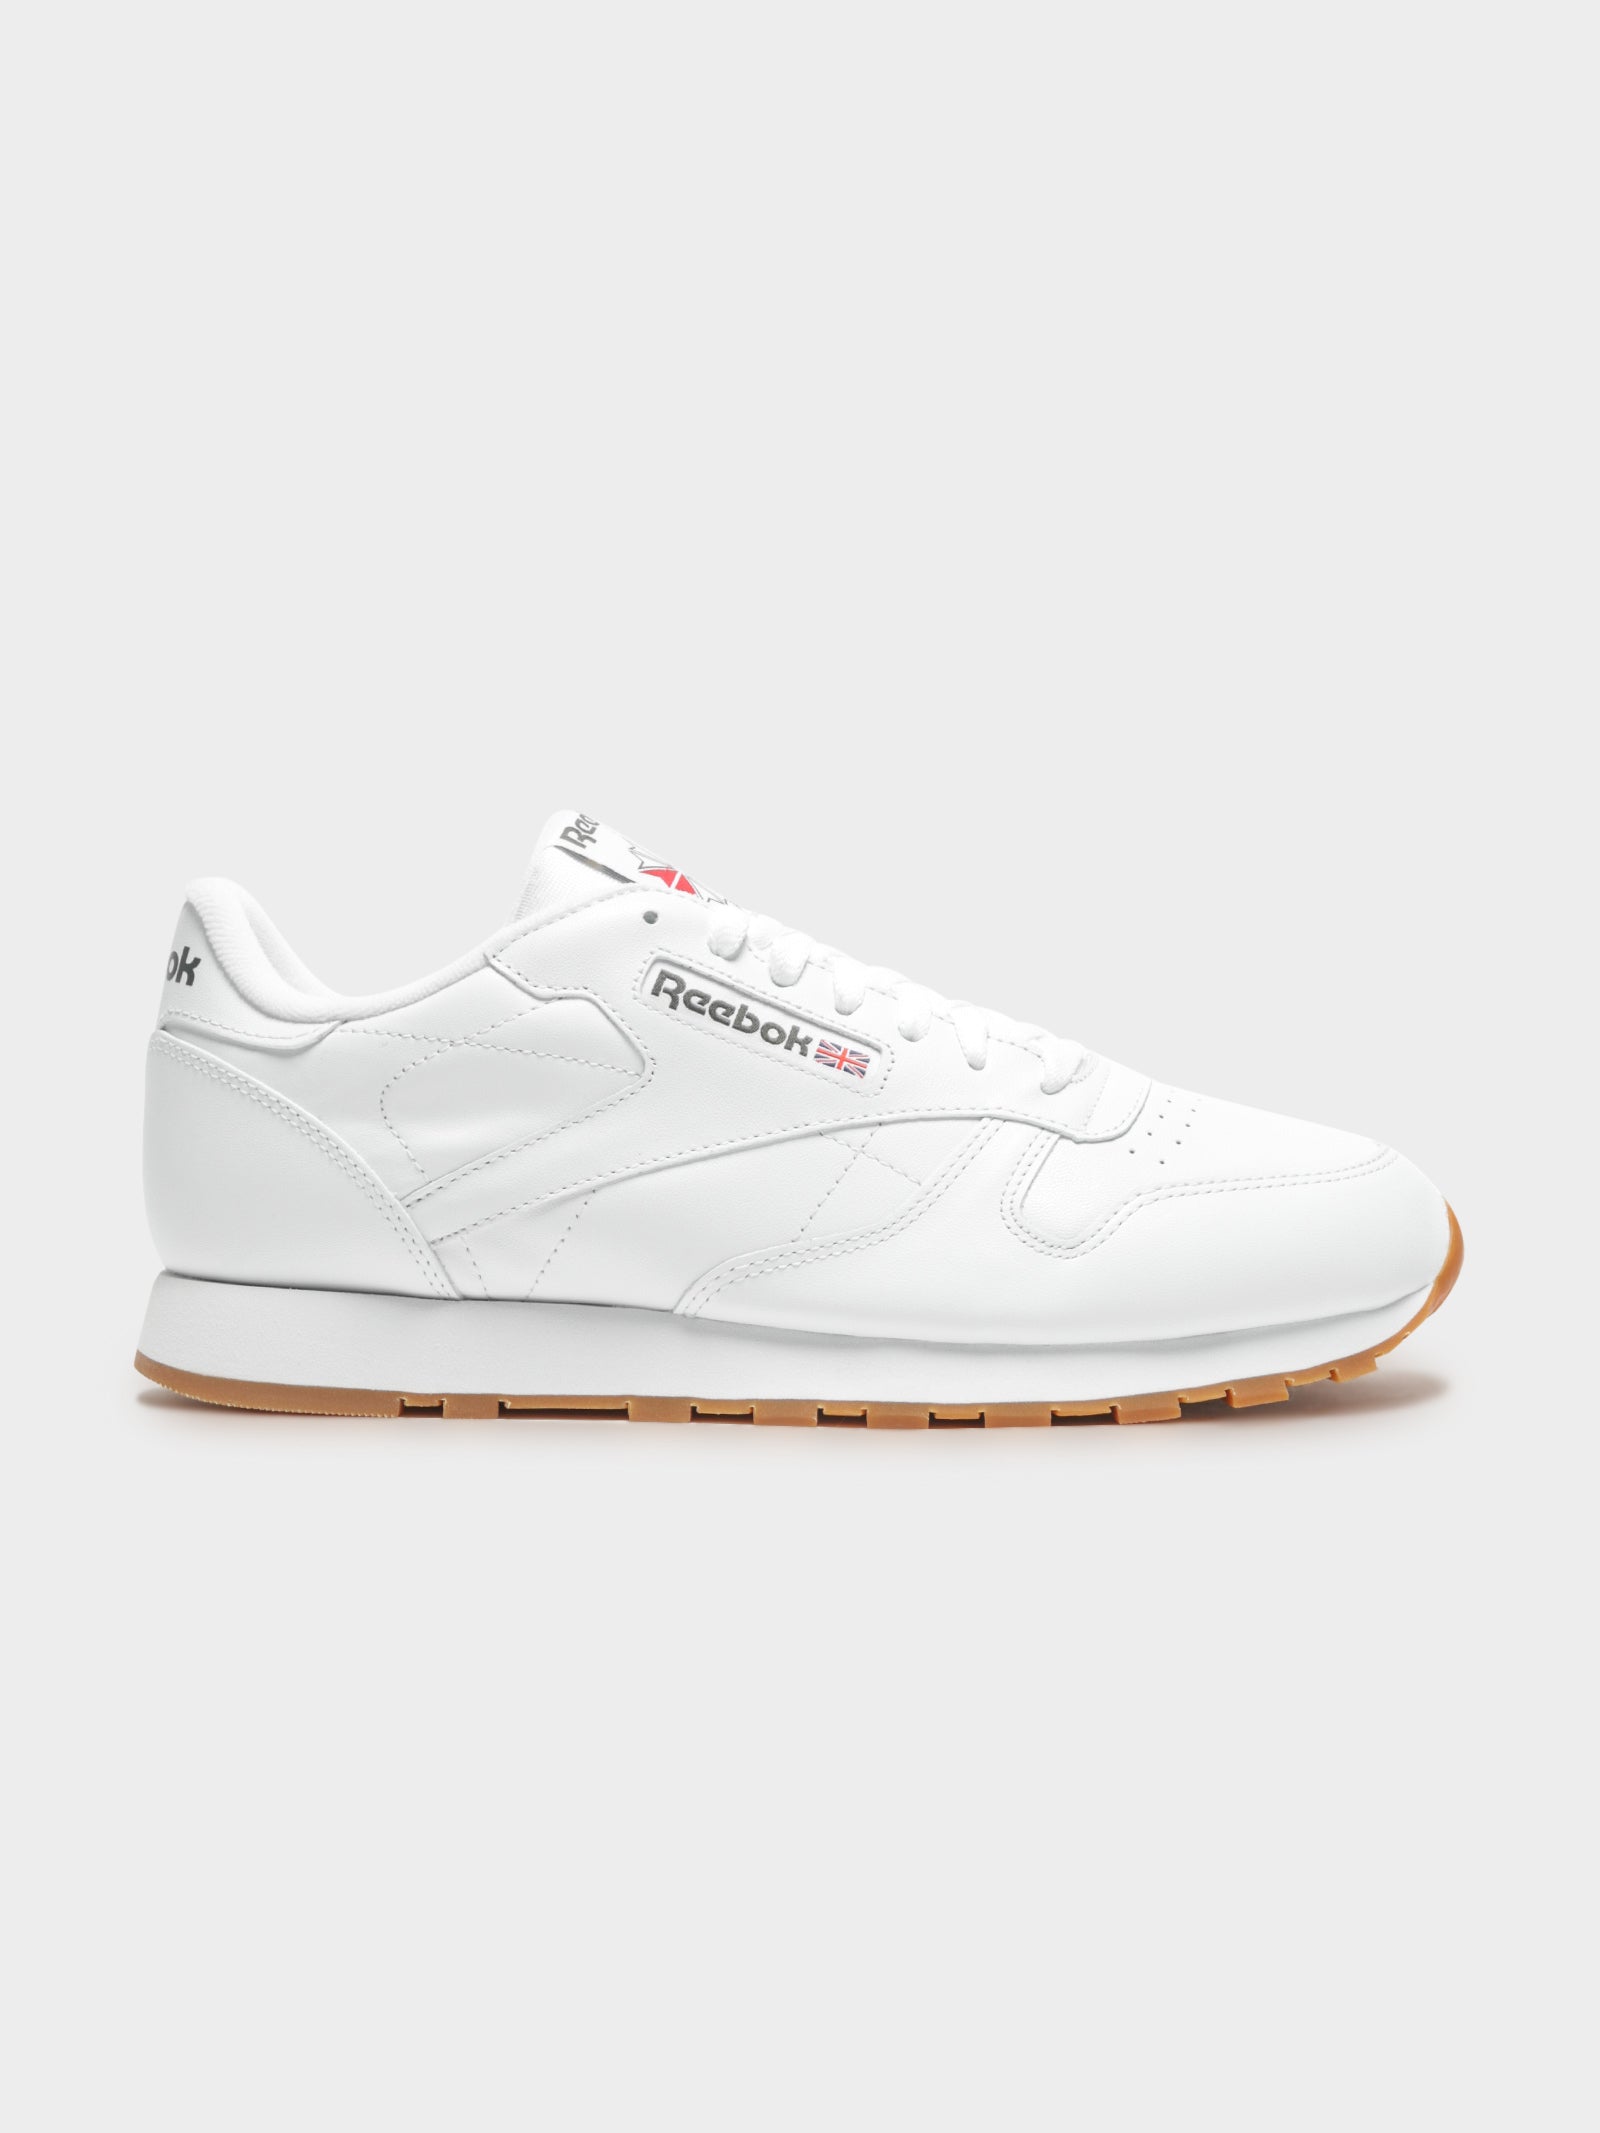 Unisex Classic Leather Sneaker in White